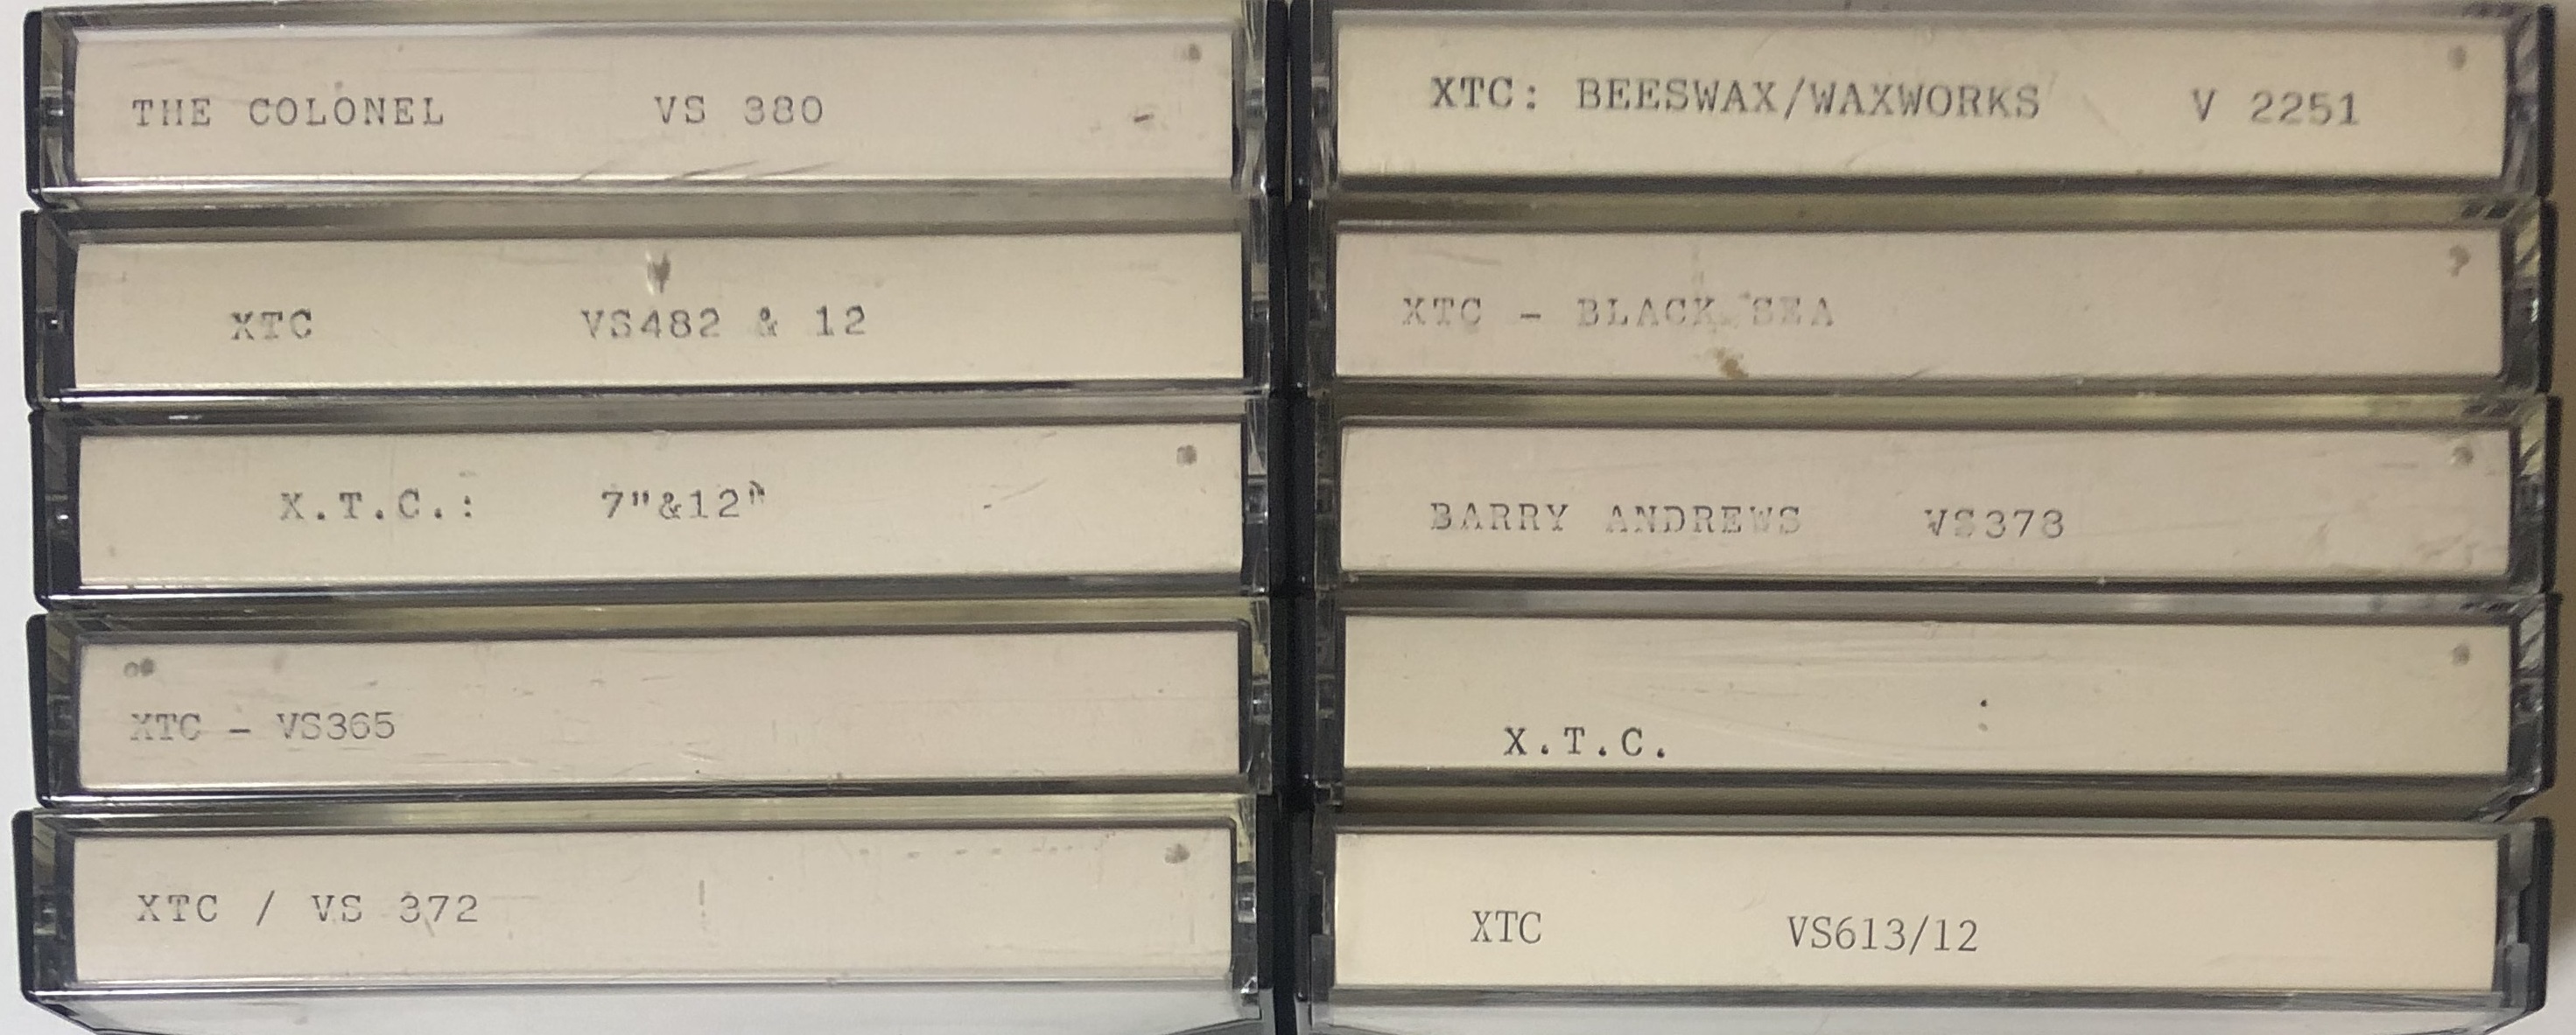 XTC AND RELATED PRE RELEASE/DEMO CASSETTES. - Image 2 of 4